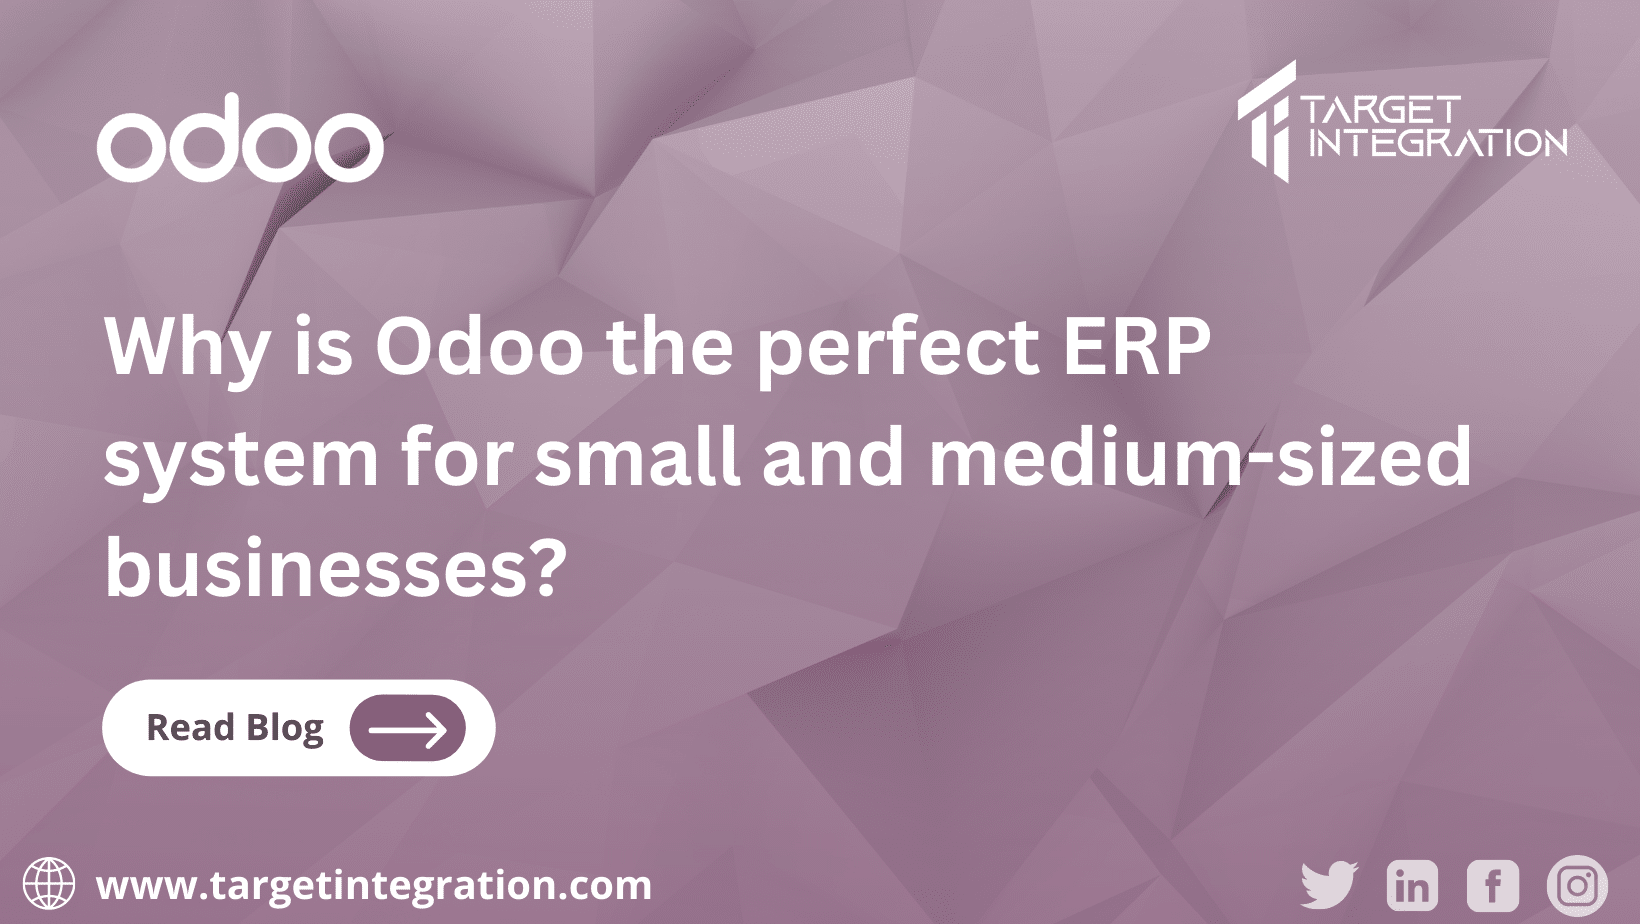 Odoo for SMBs